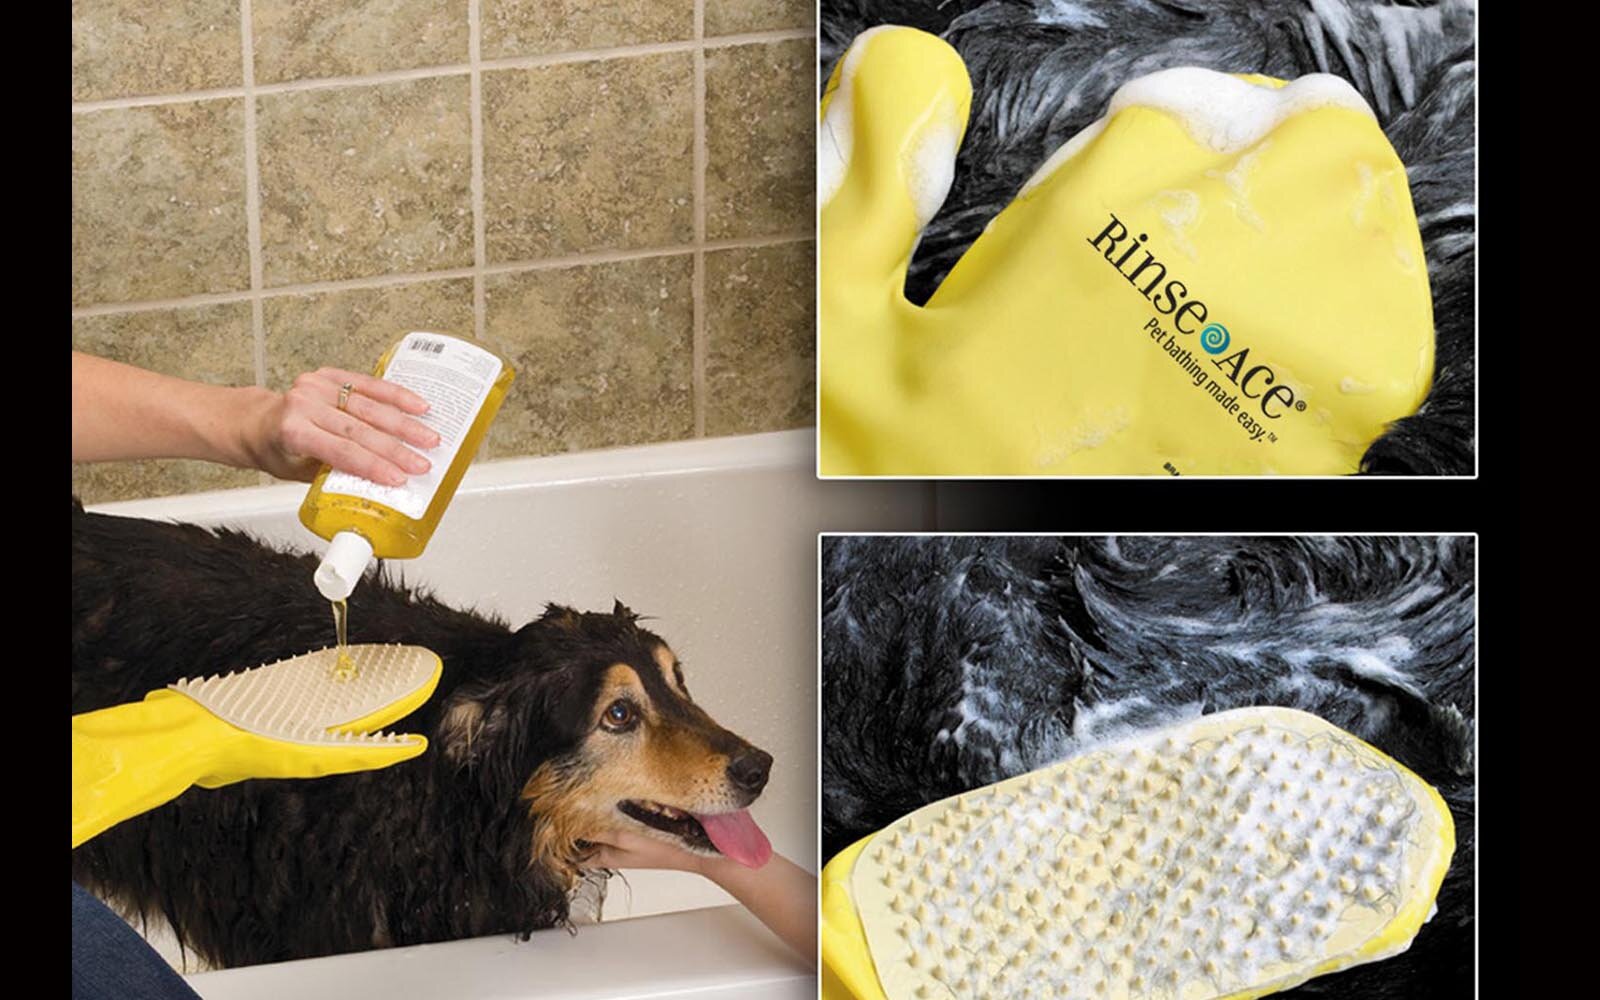 https://rinseace.com/Content/images/petshowers/ShampMittCombo_1500_72dpi.jpg